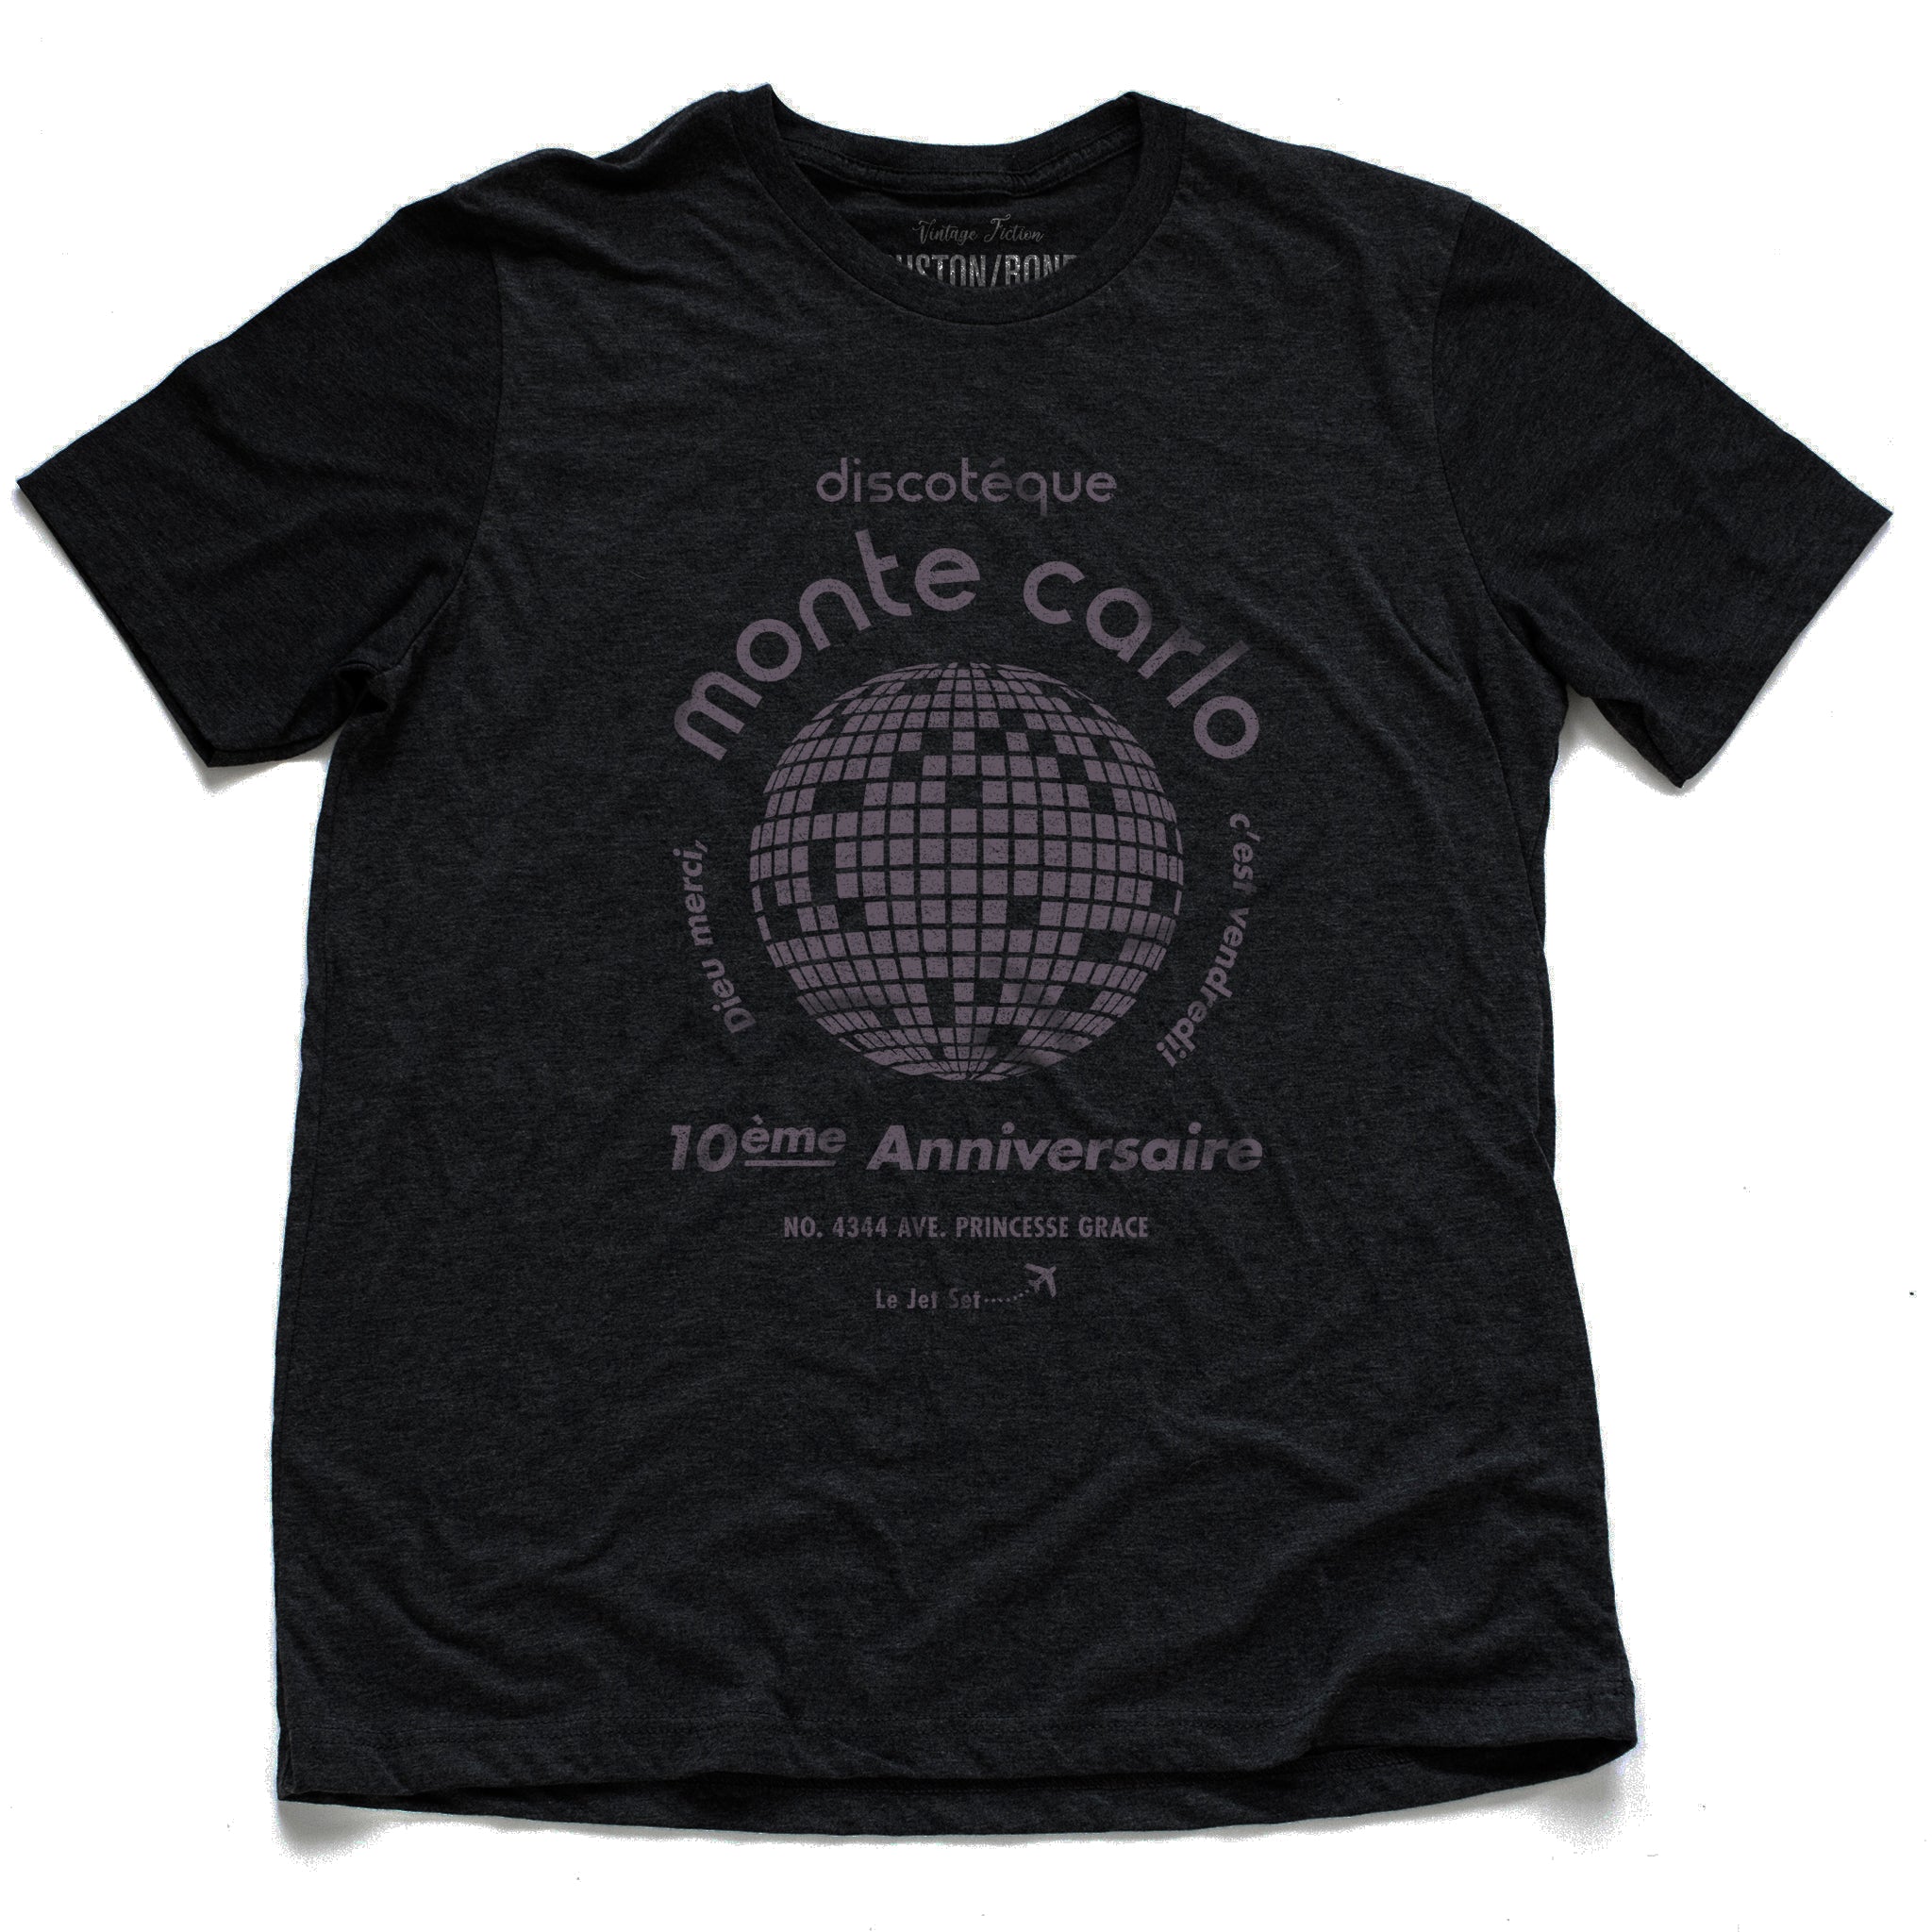 A retro, vintage-inspired t-shirt in black heather, with a disco ball graphic, promoting a fictional Monte Carlo discotheque from the 1970s and 80s. By fashion brand Ruston/Bond, from wolfsaint.net